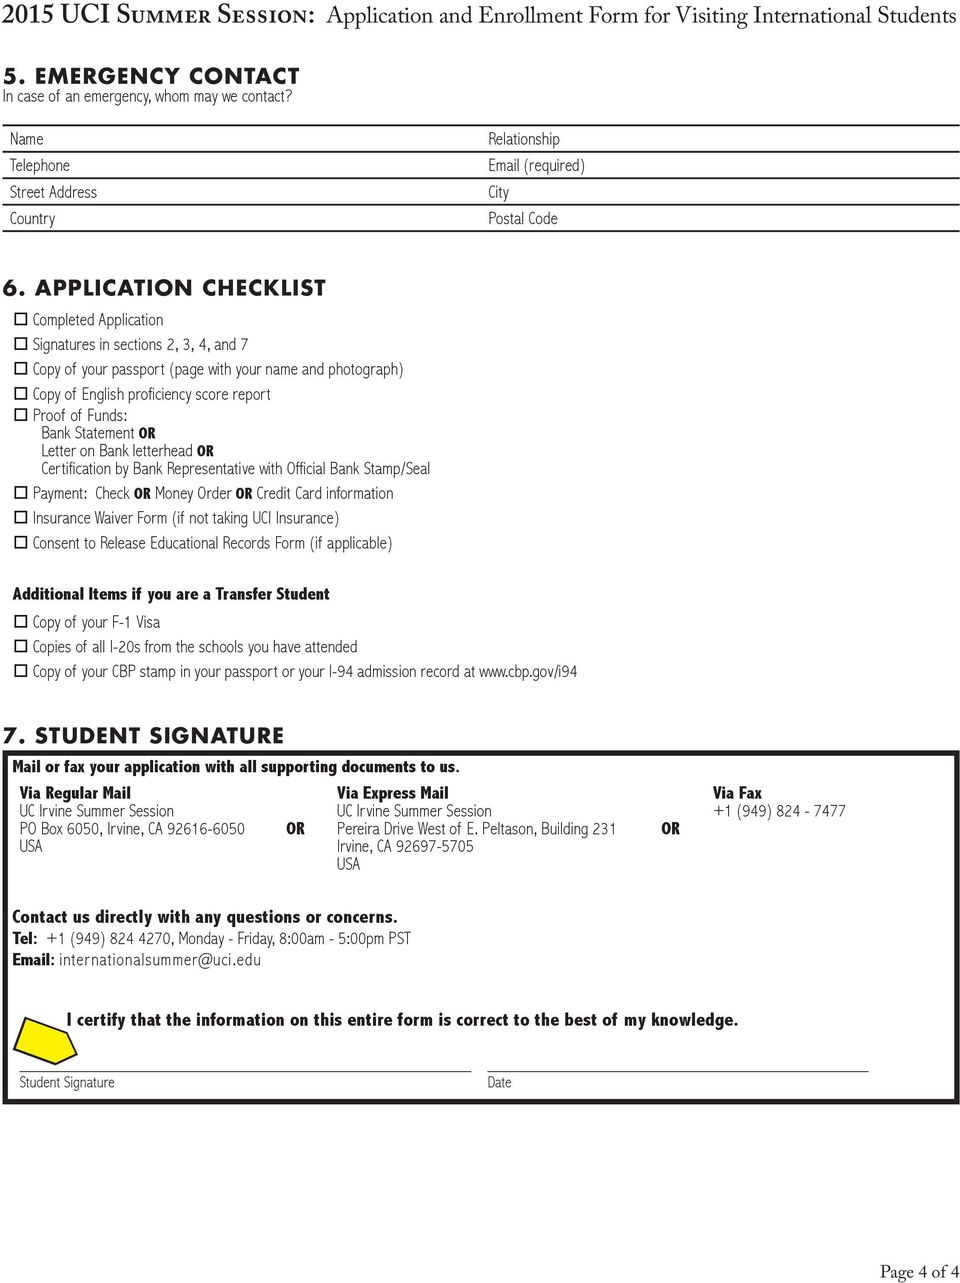 APPLICATION CHECKLIST o Completed Application o Signatures in sections 2, 3, 4, and 7 o Copy of your passport (page with your name and photograph) o Copy of English proficiency score report o Proof